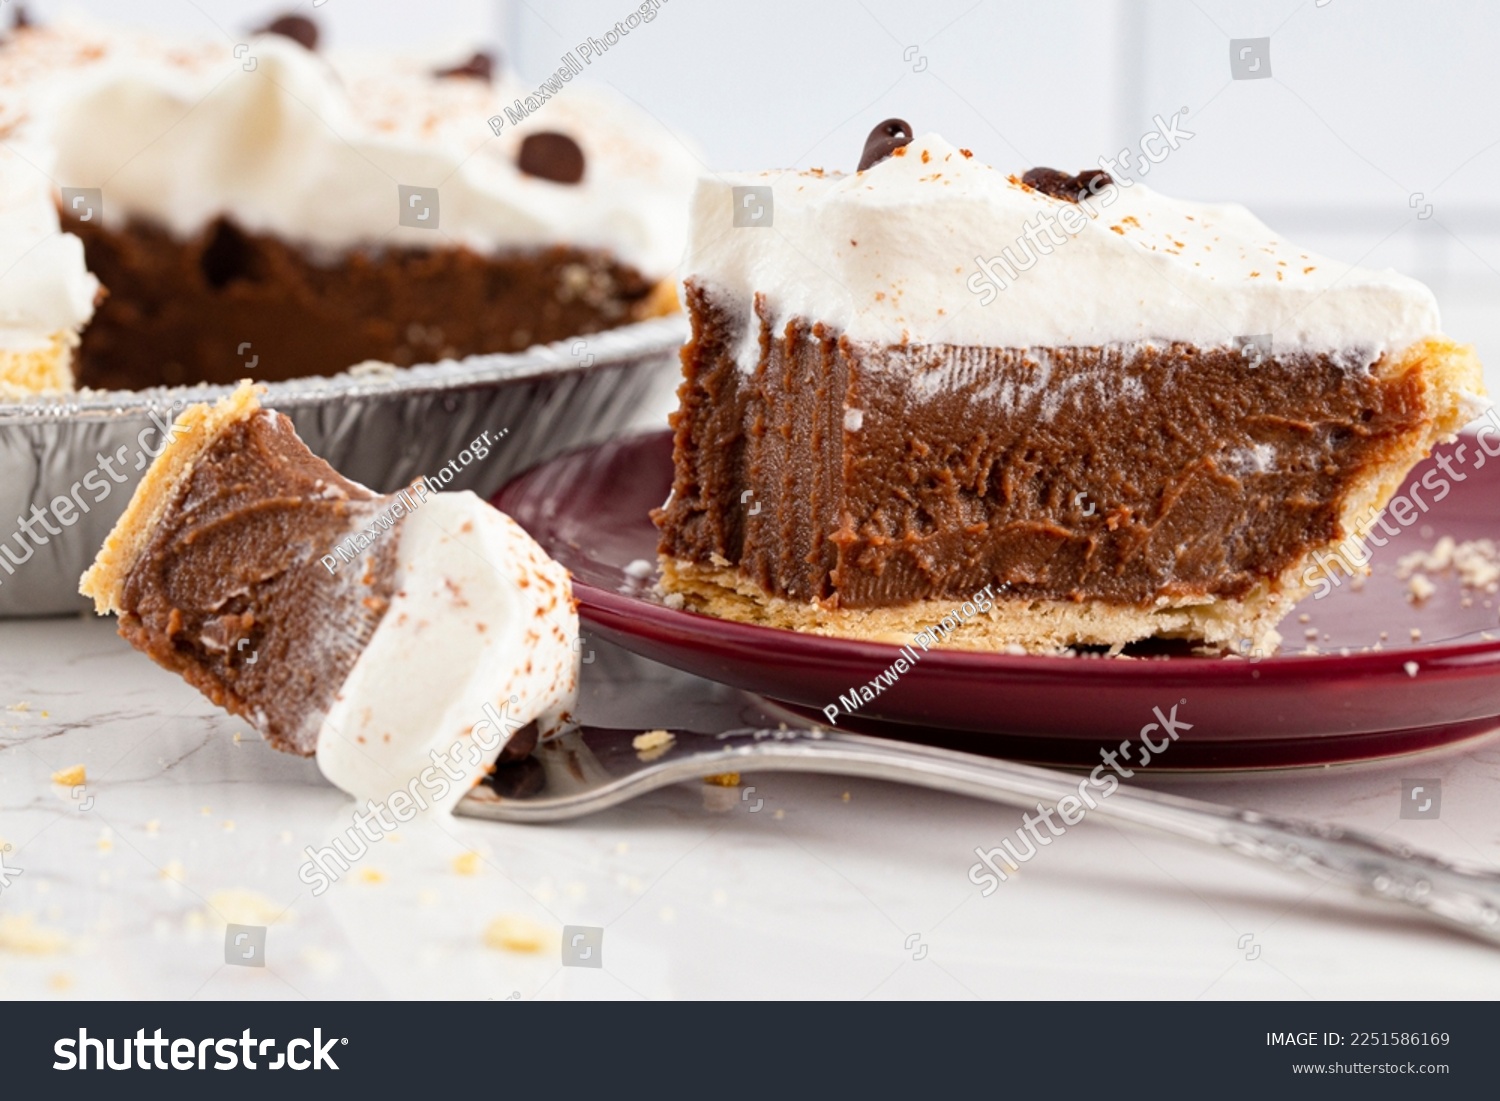 A Chocolate Cream Pie Topped with Chocolate Chips and Cocoa on Whipped Cream #2251586169